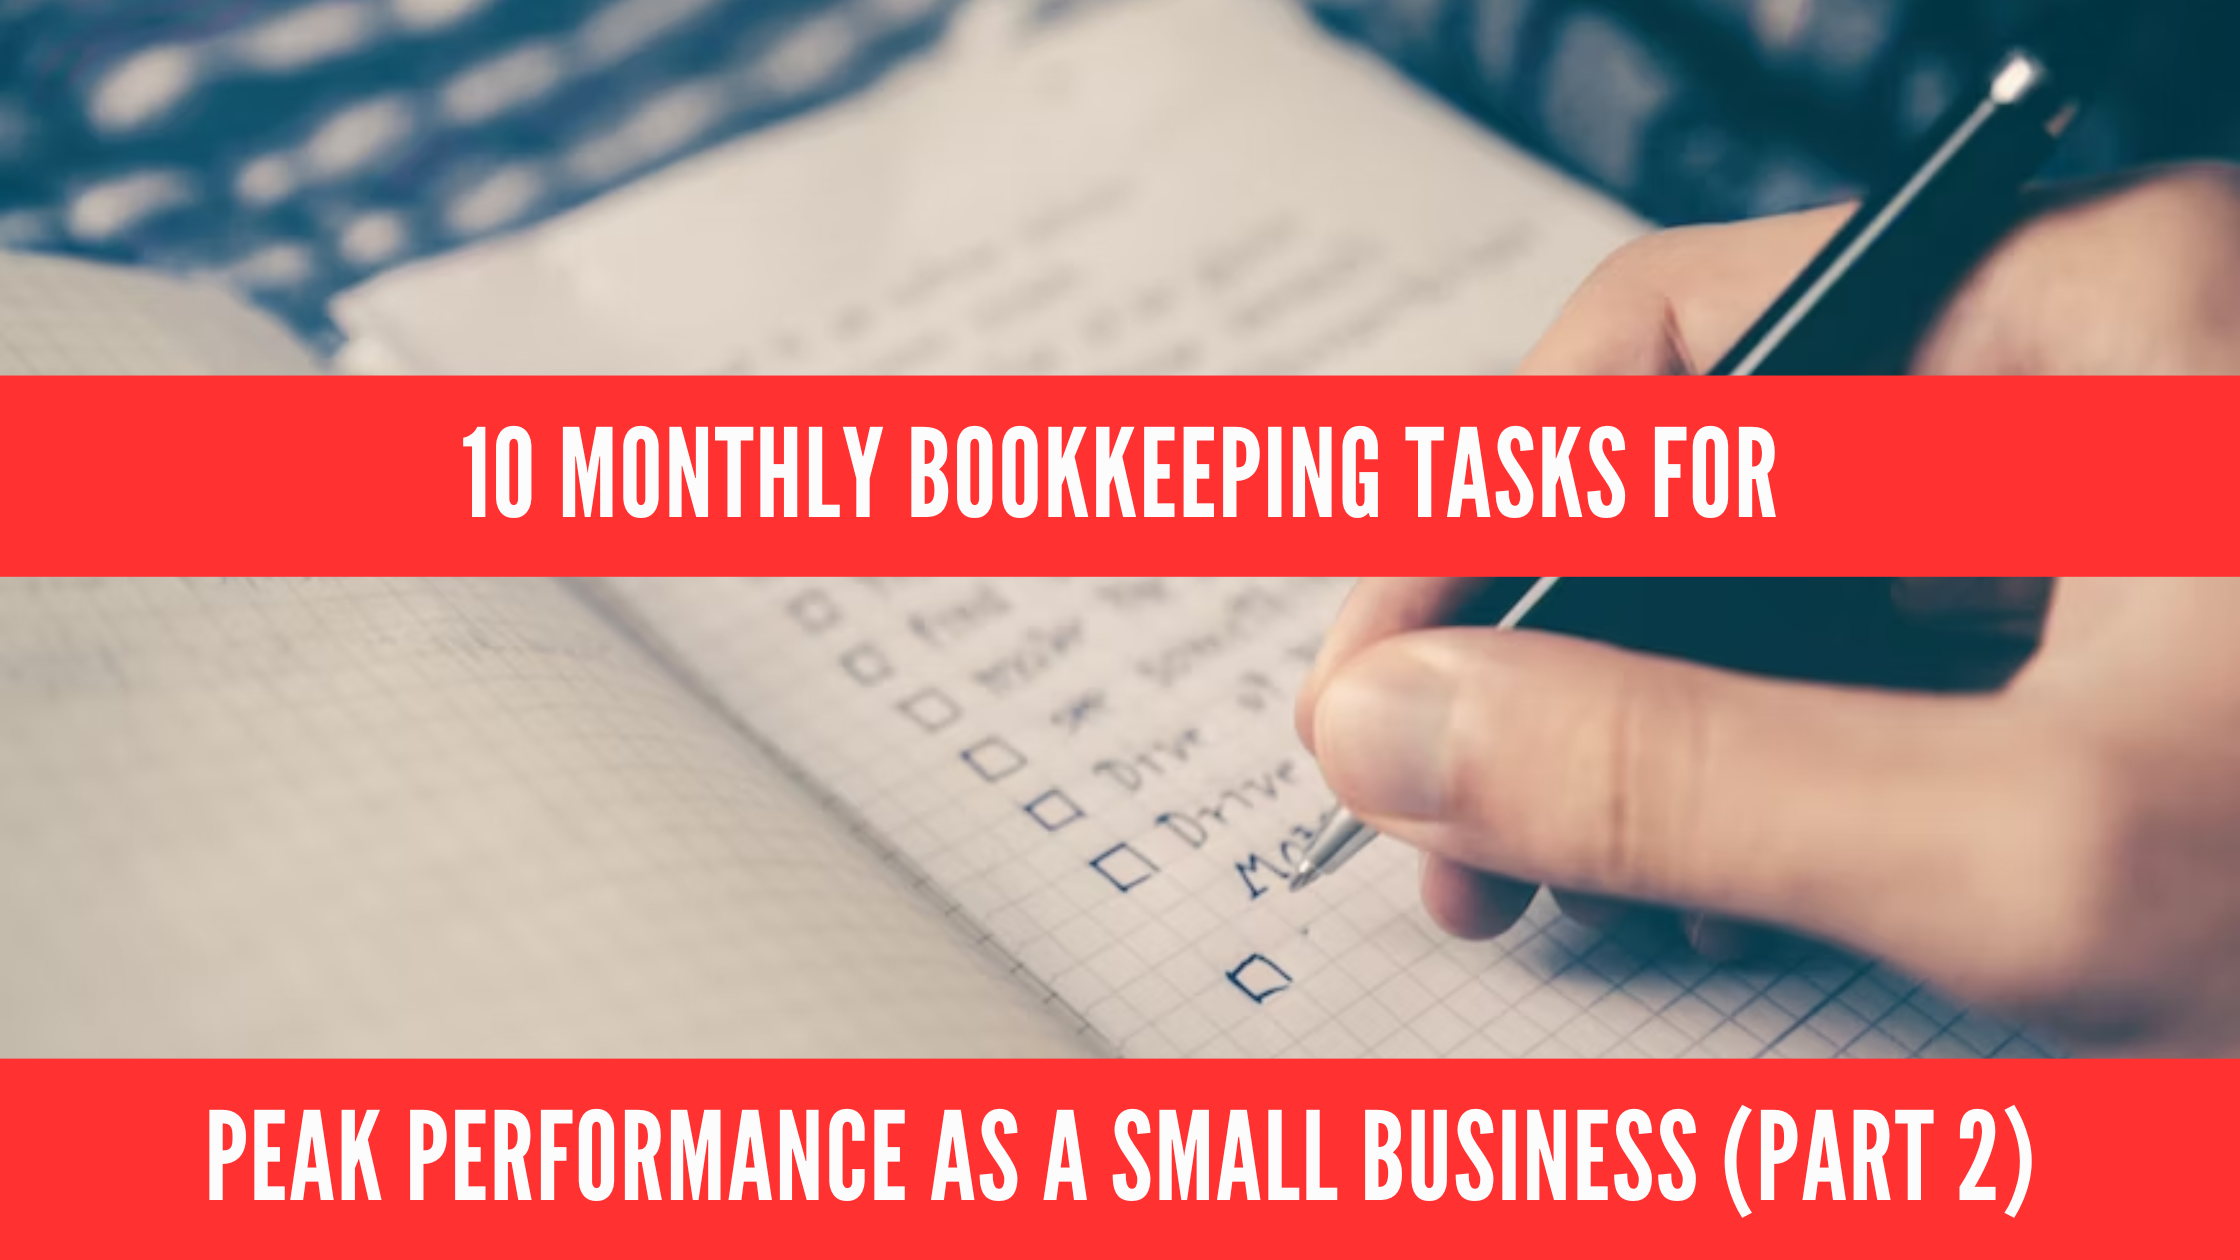 Bookkeeping tasks for peak performance as a small business (part 2)